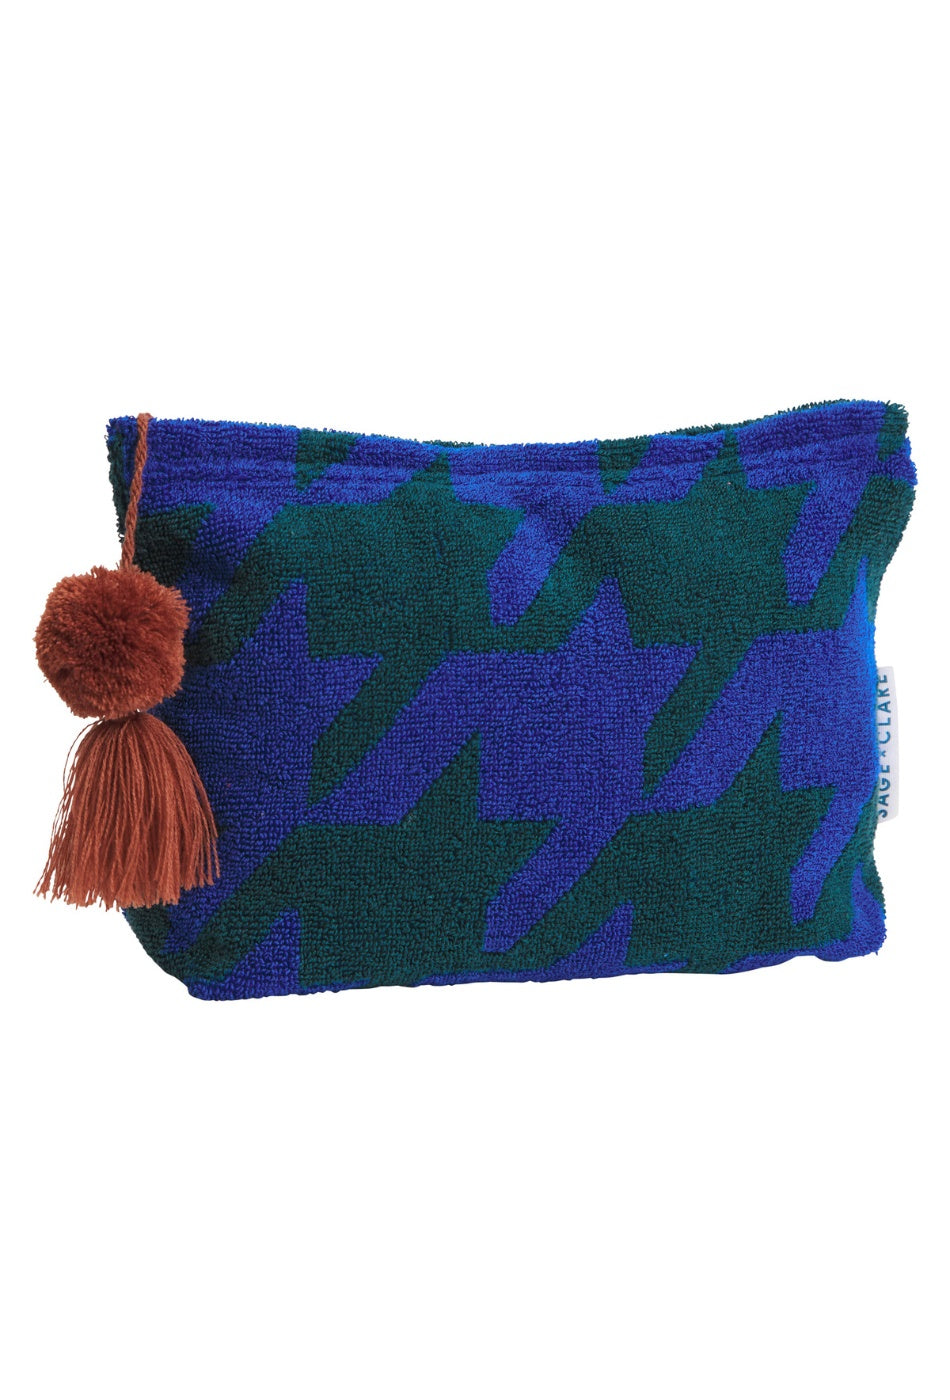 Vinita Terry Pouch - Lapis - Large-SAGE AND CLARE-P&K The General Store